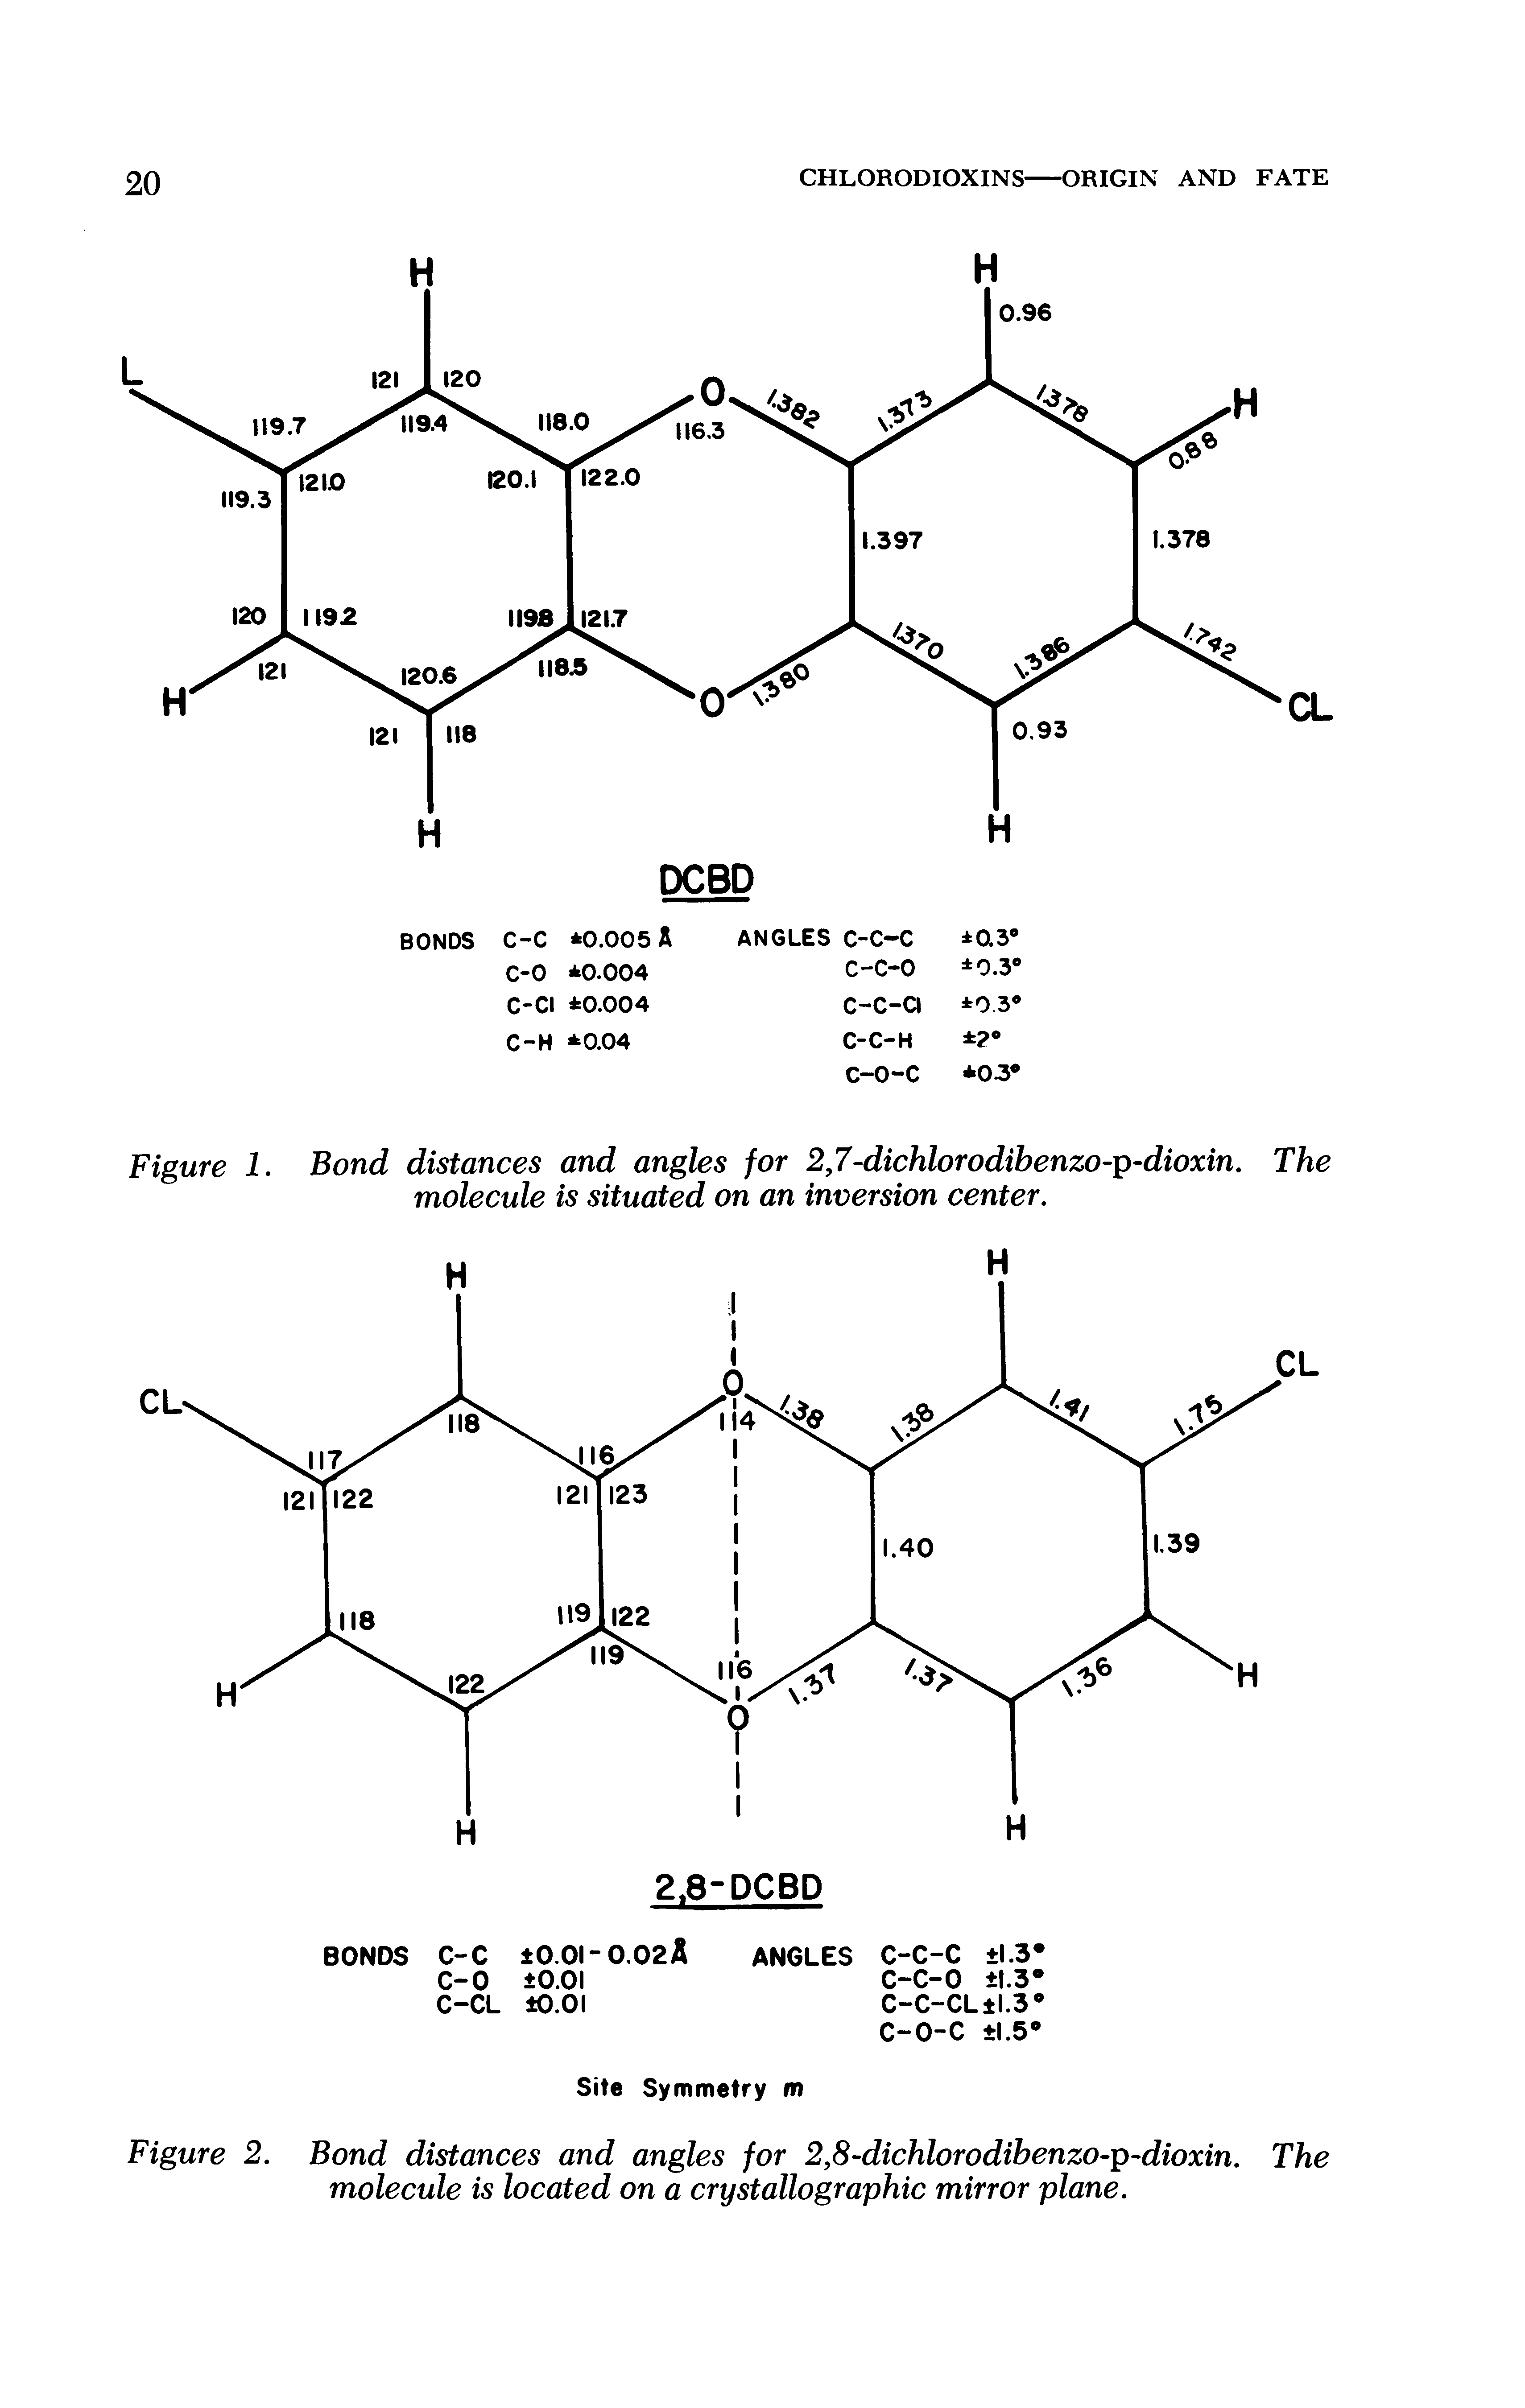 Figure 1. Bond distances and angles for 2,7-dichlorodibenzo-p-dioxin. The molecule is situated on an inversion center.